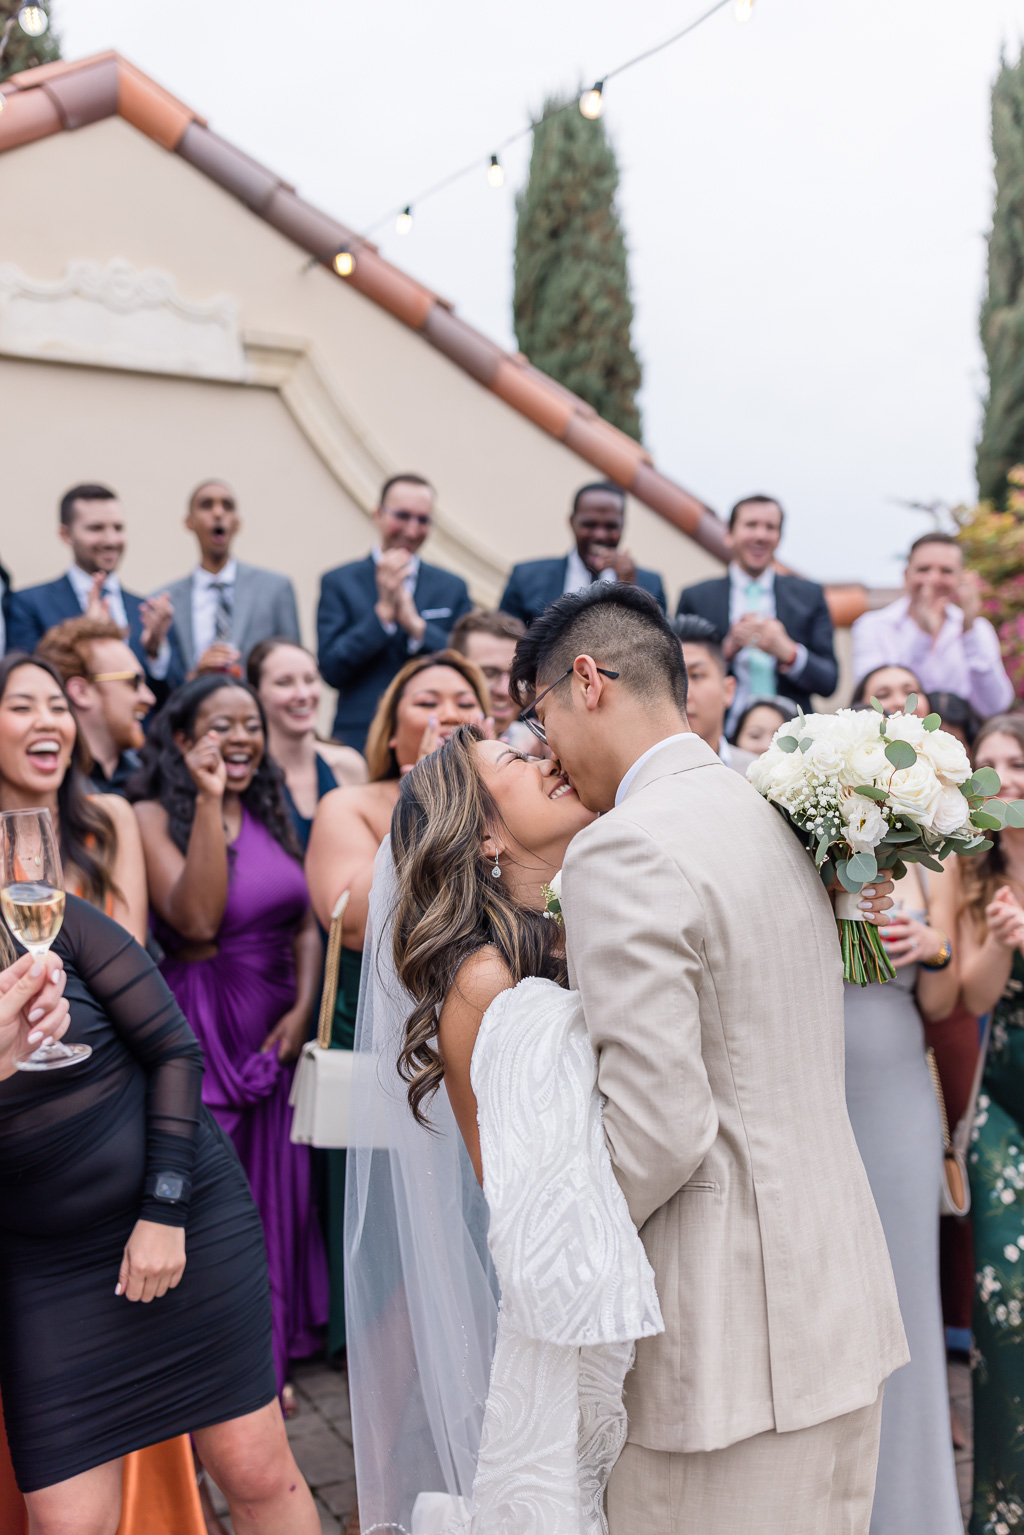 a candid cheering and kissing moment while taking group photos with friends